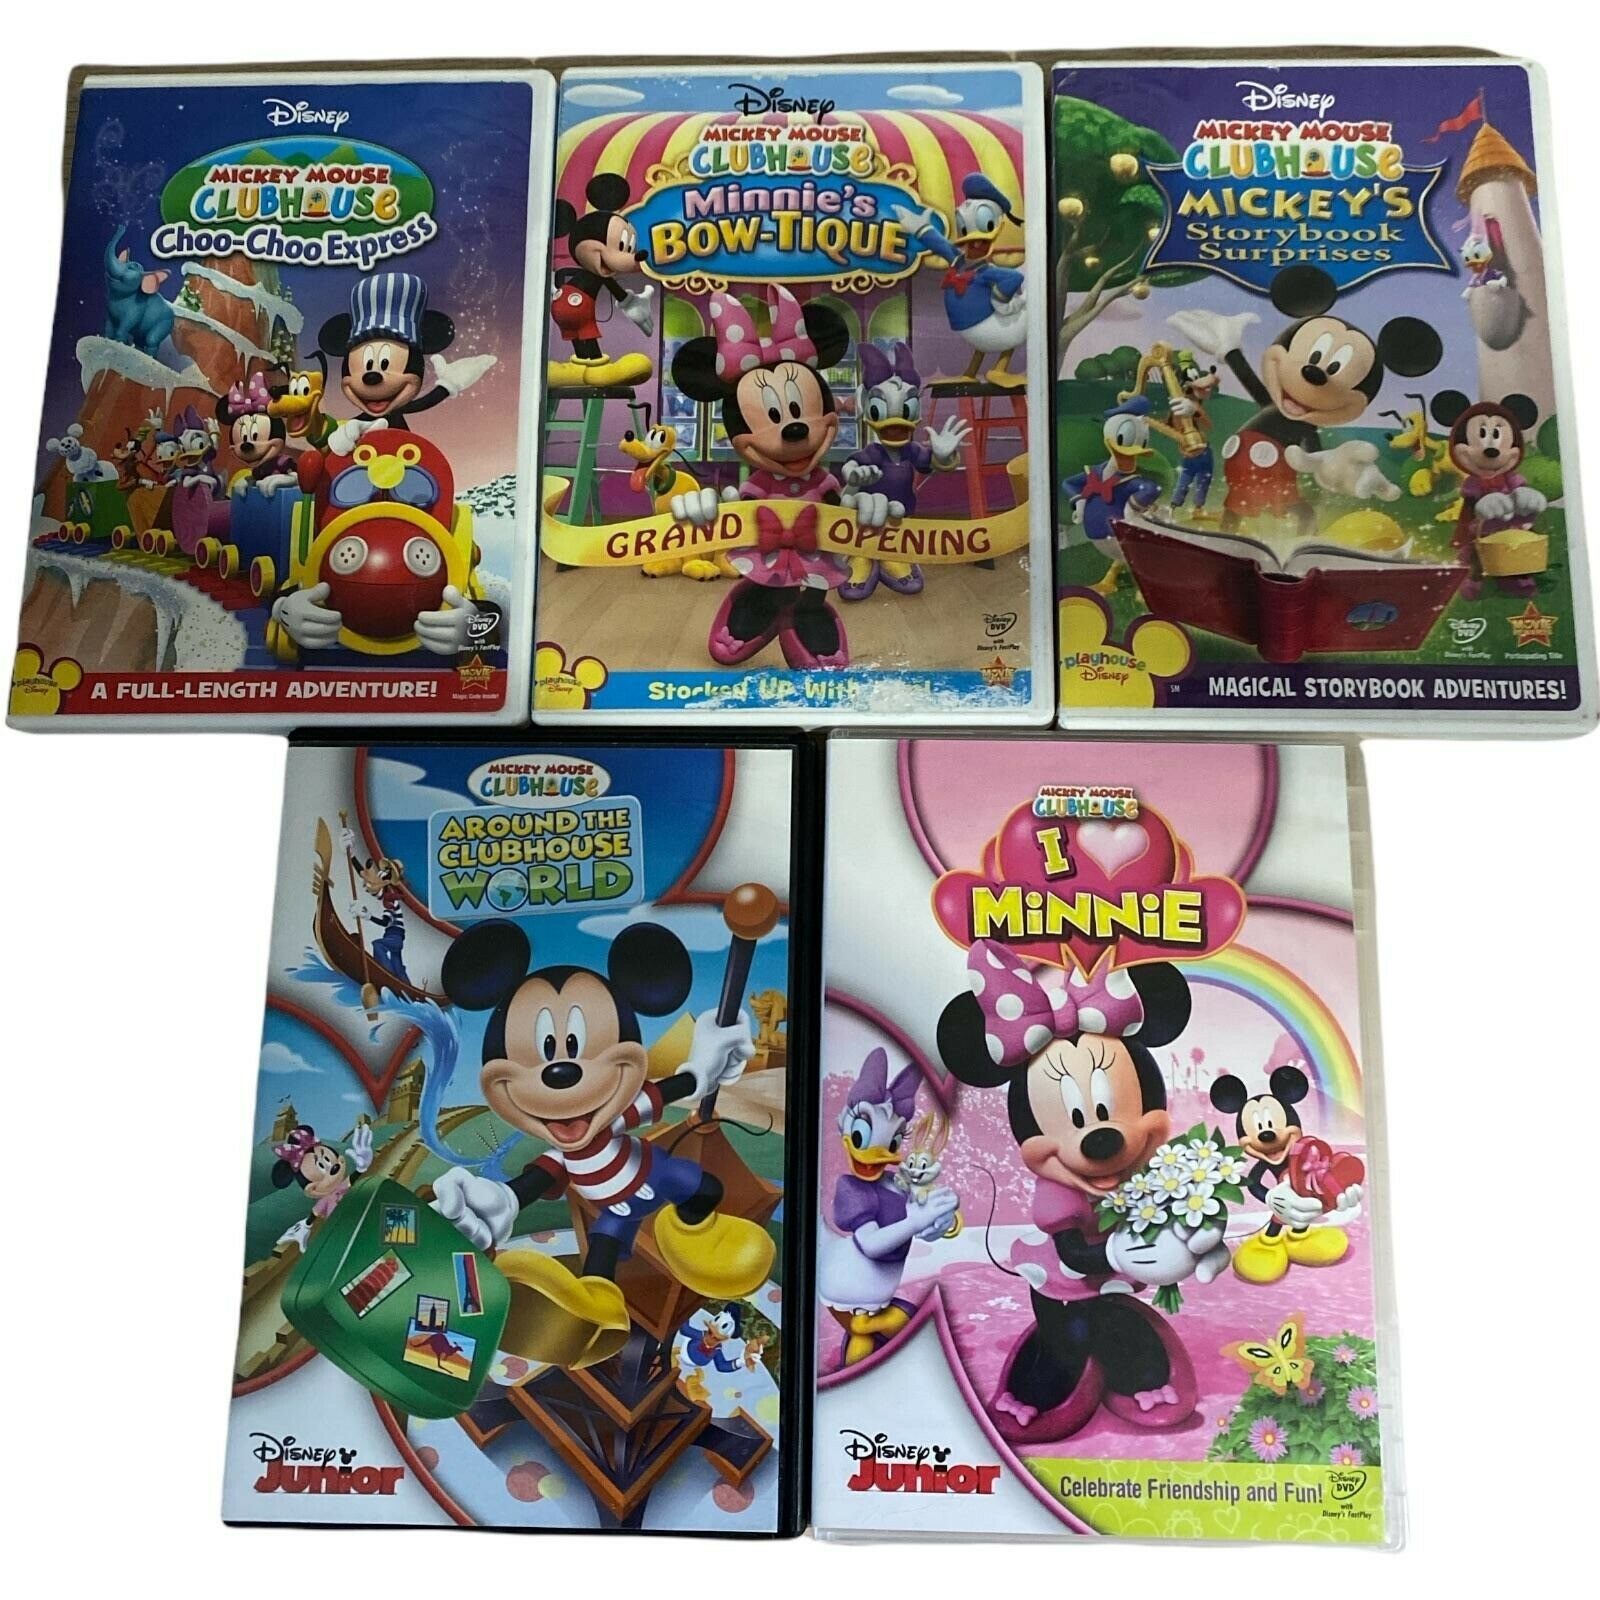 Disney Mickey Mouse Clubhouse DVD Lot Of 5 and similar items